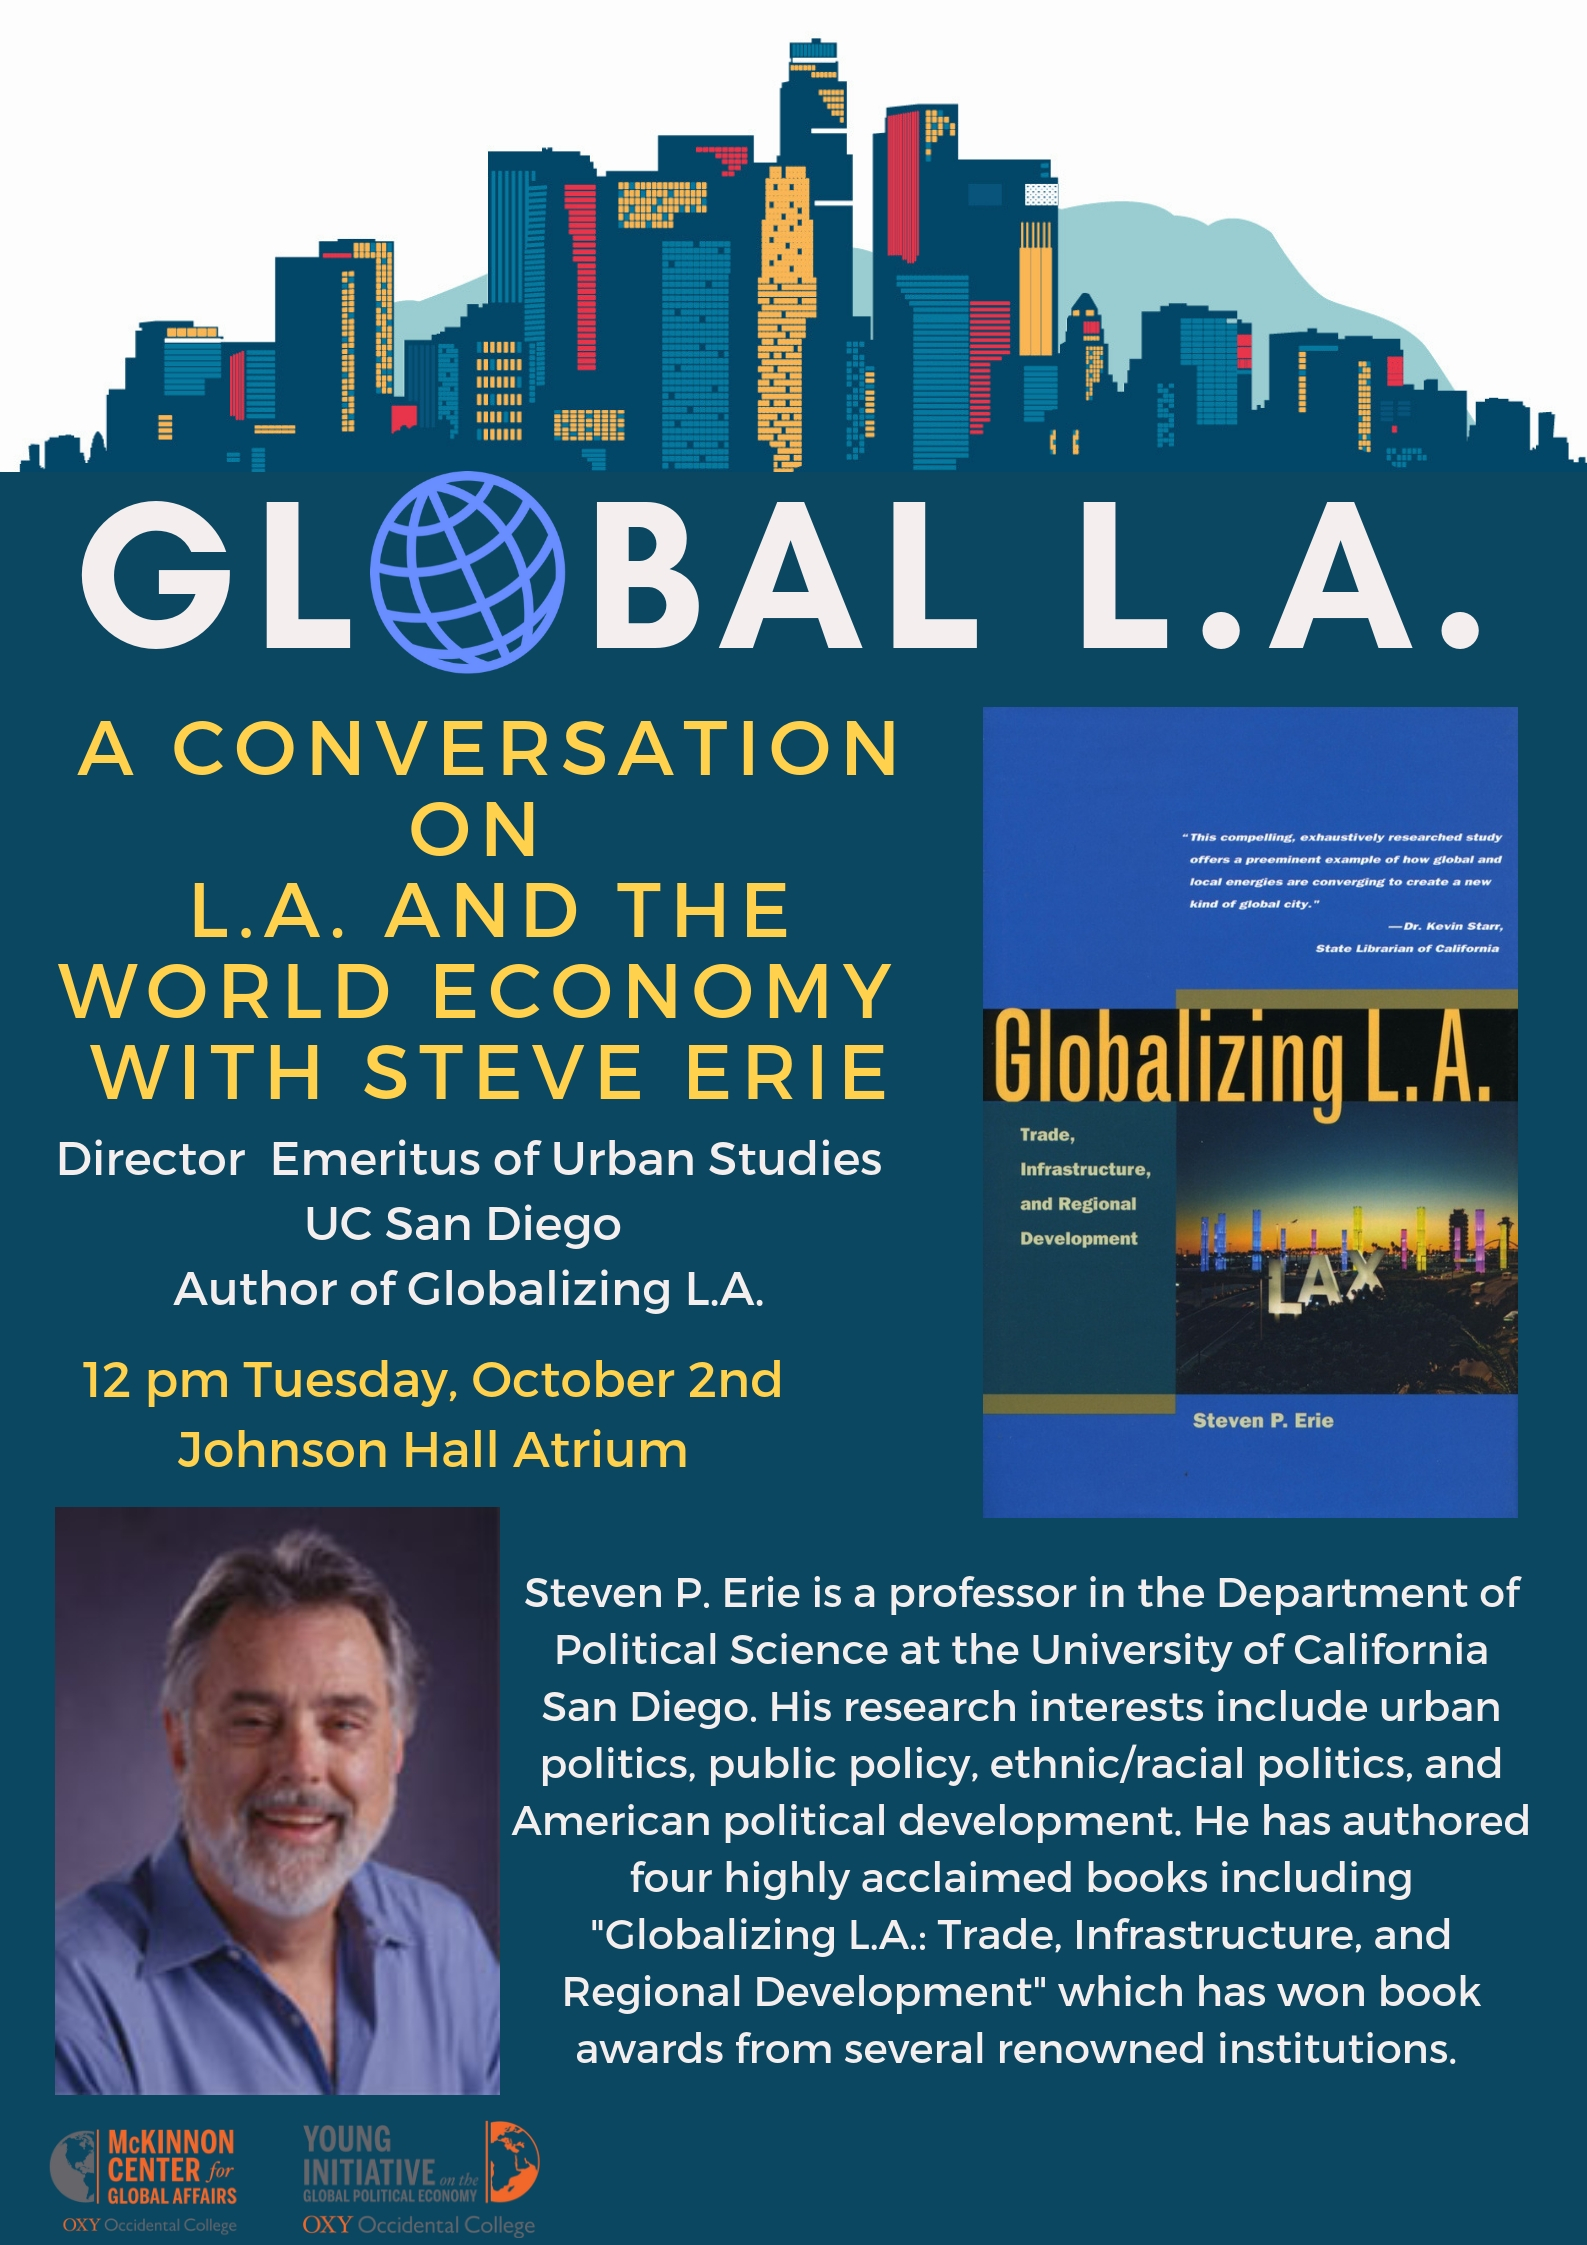 Image for Global L.A. with Steve Erie Event